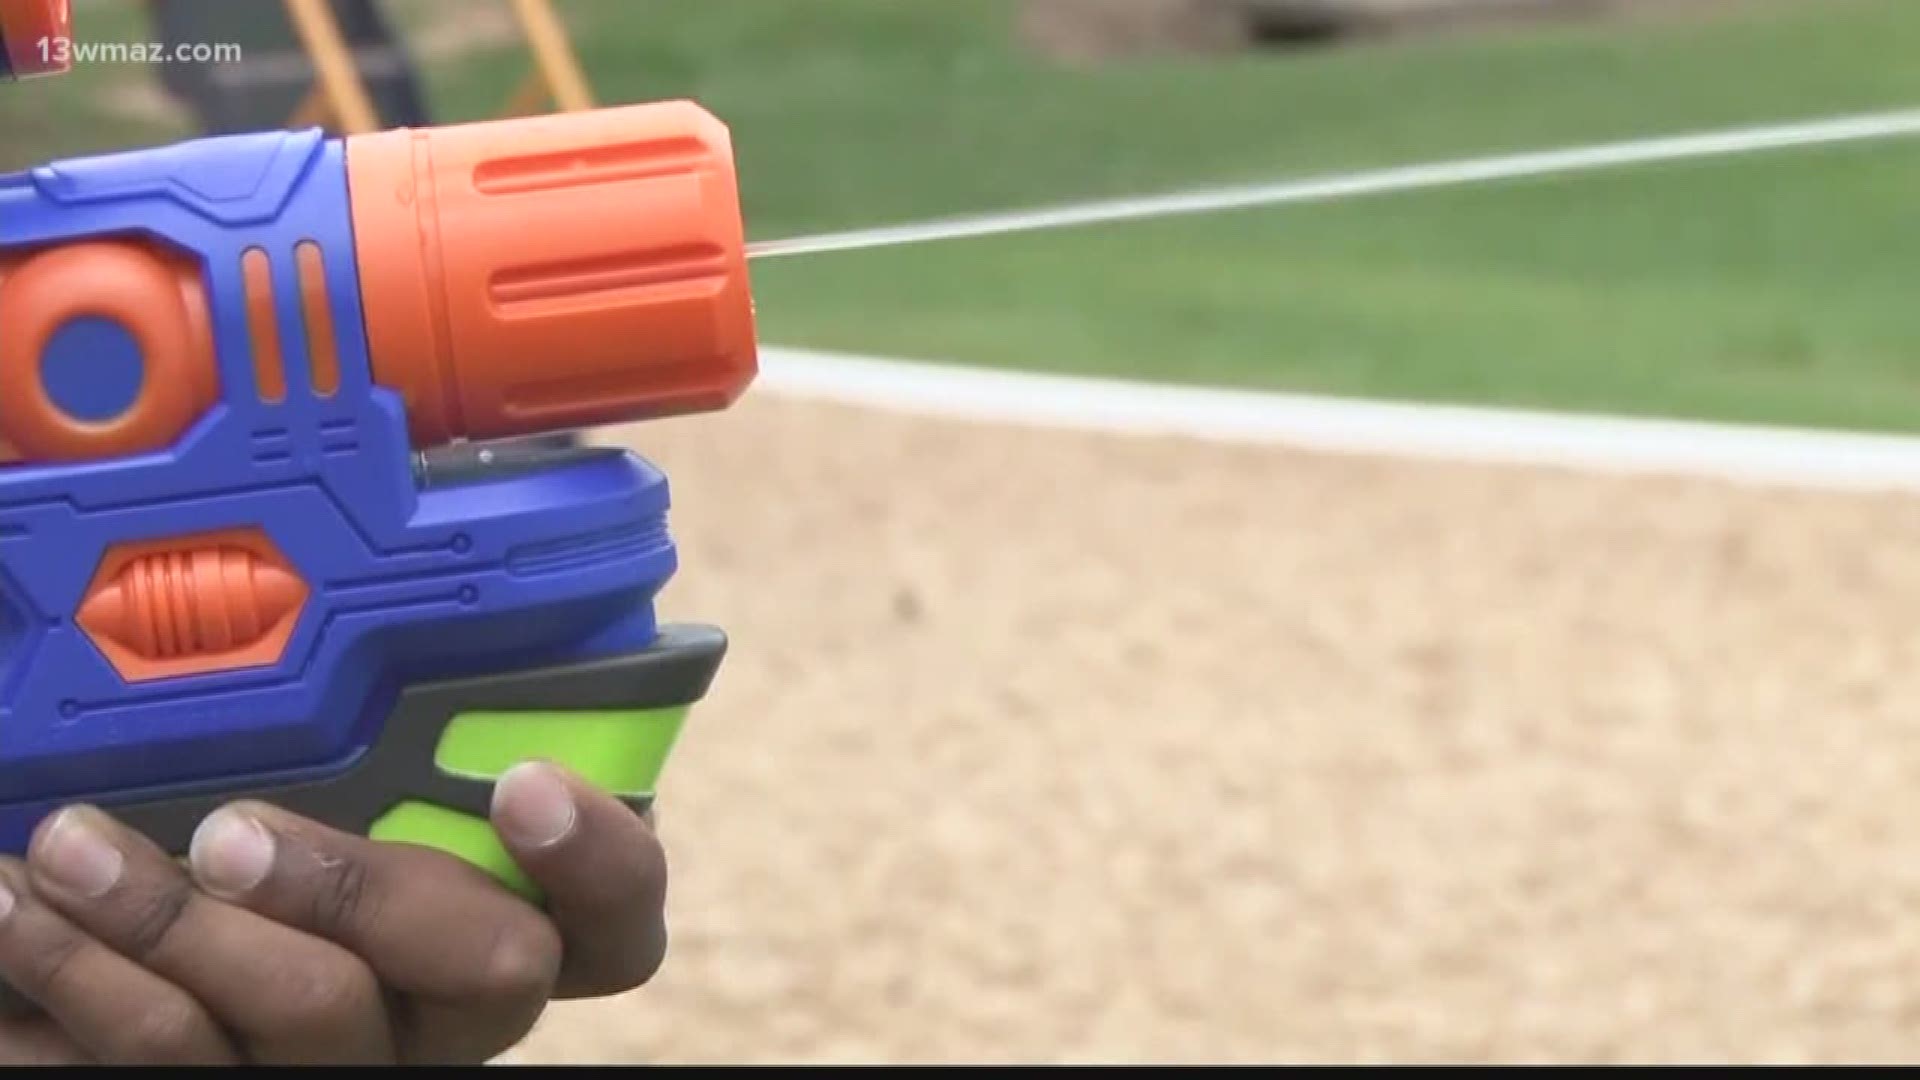 Some Central Georgia leaders are encouraging children to "put the guns down" by picking up another type of gun — a water gun. Organizers of two upcoming events say they want to give the Macon and Warner Robins communities something safe and fun to do this summer.